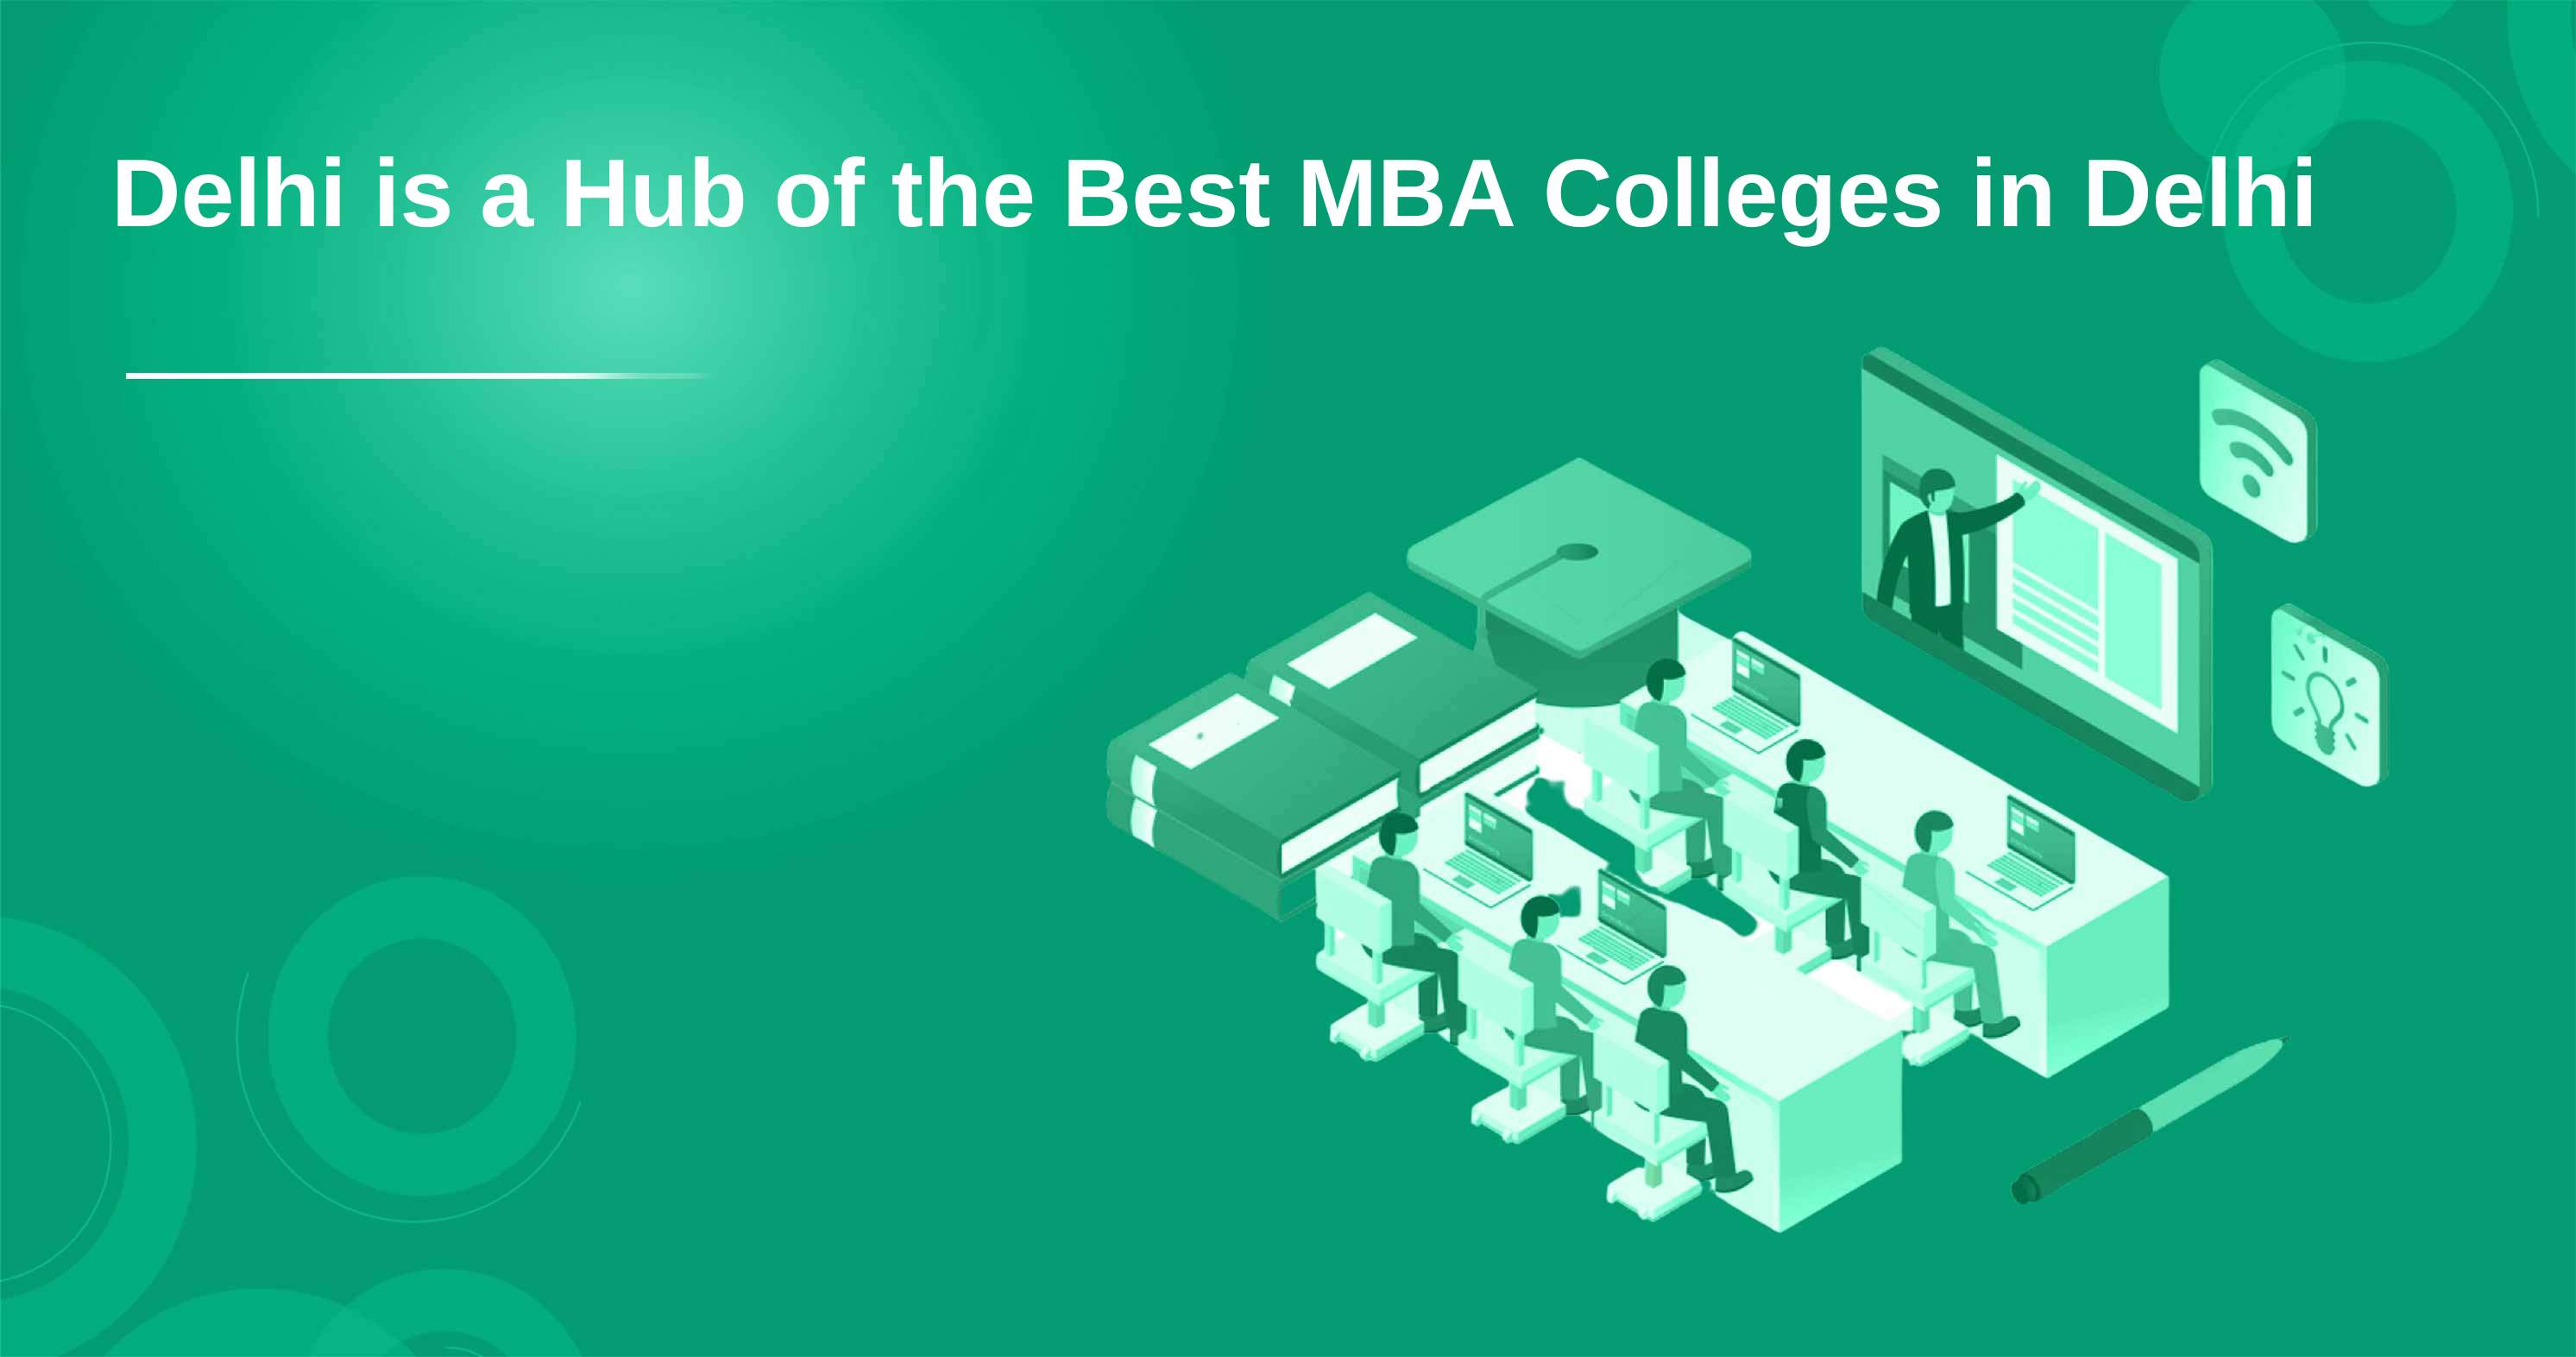 Delhi is a hub of the best MBA colleges in Delhi